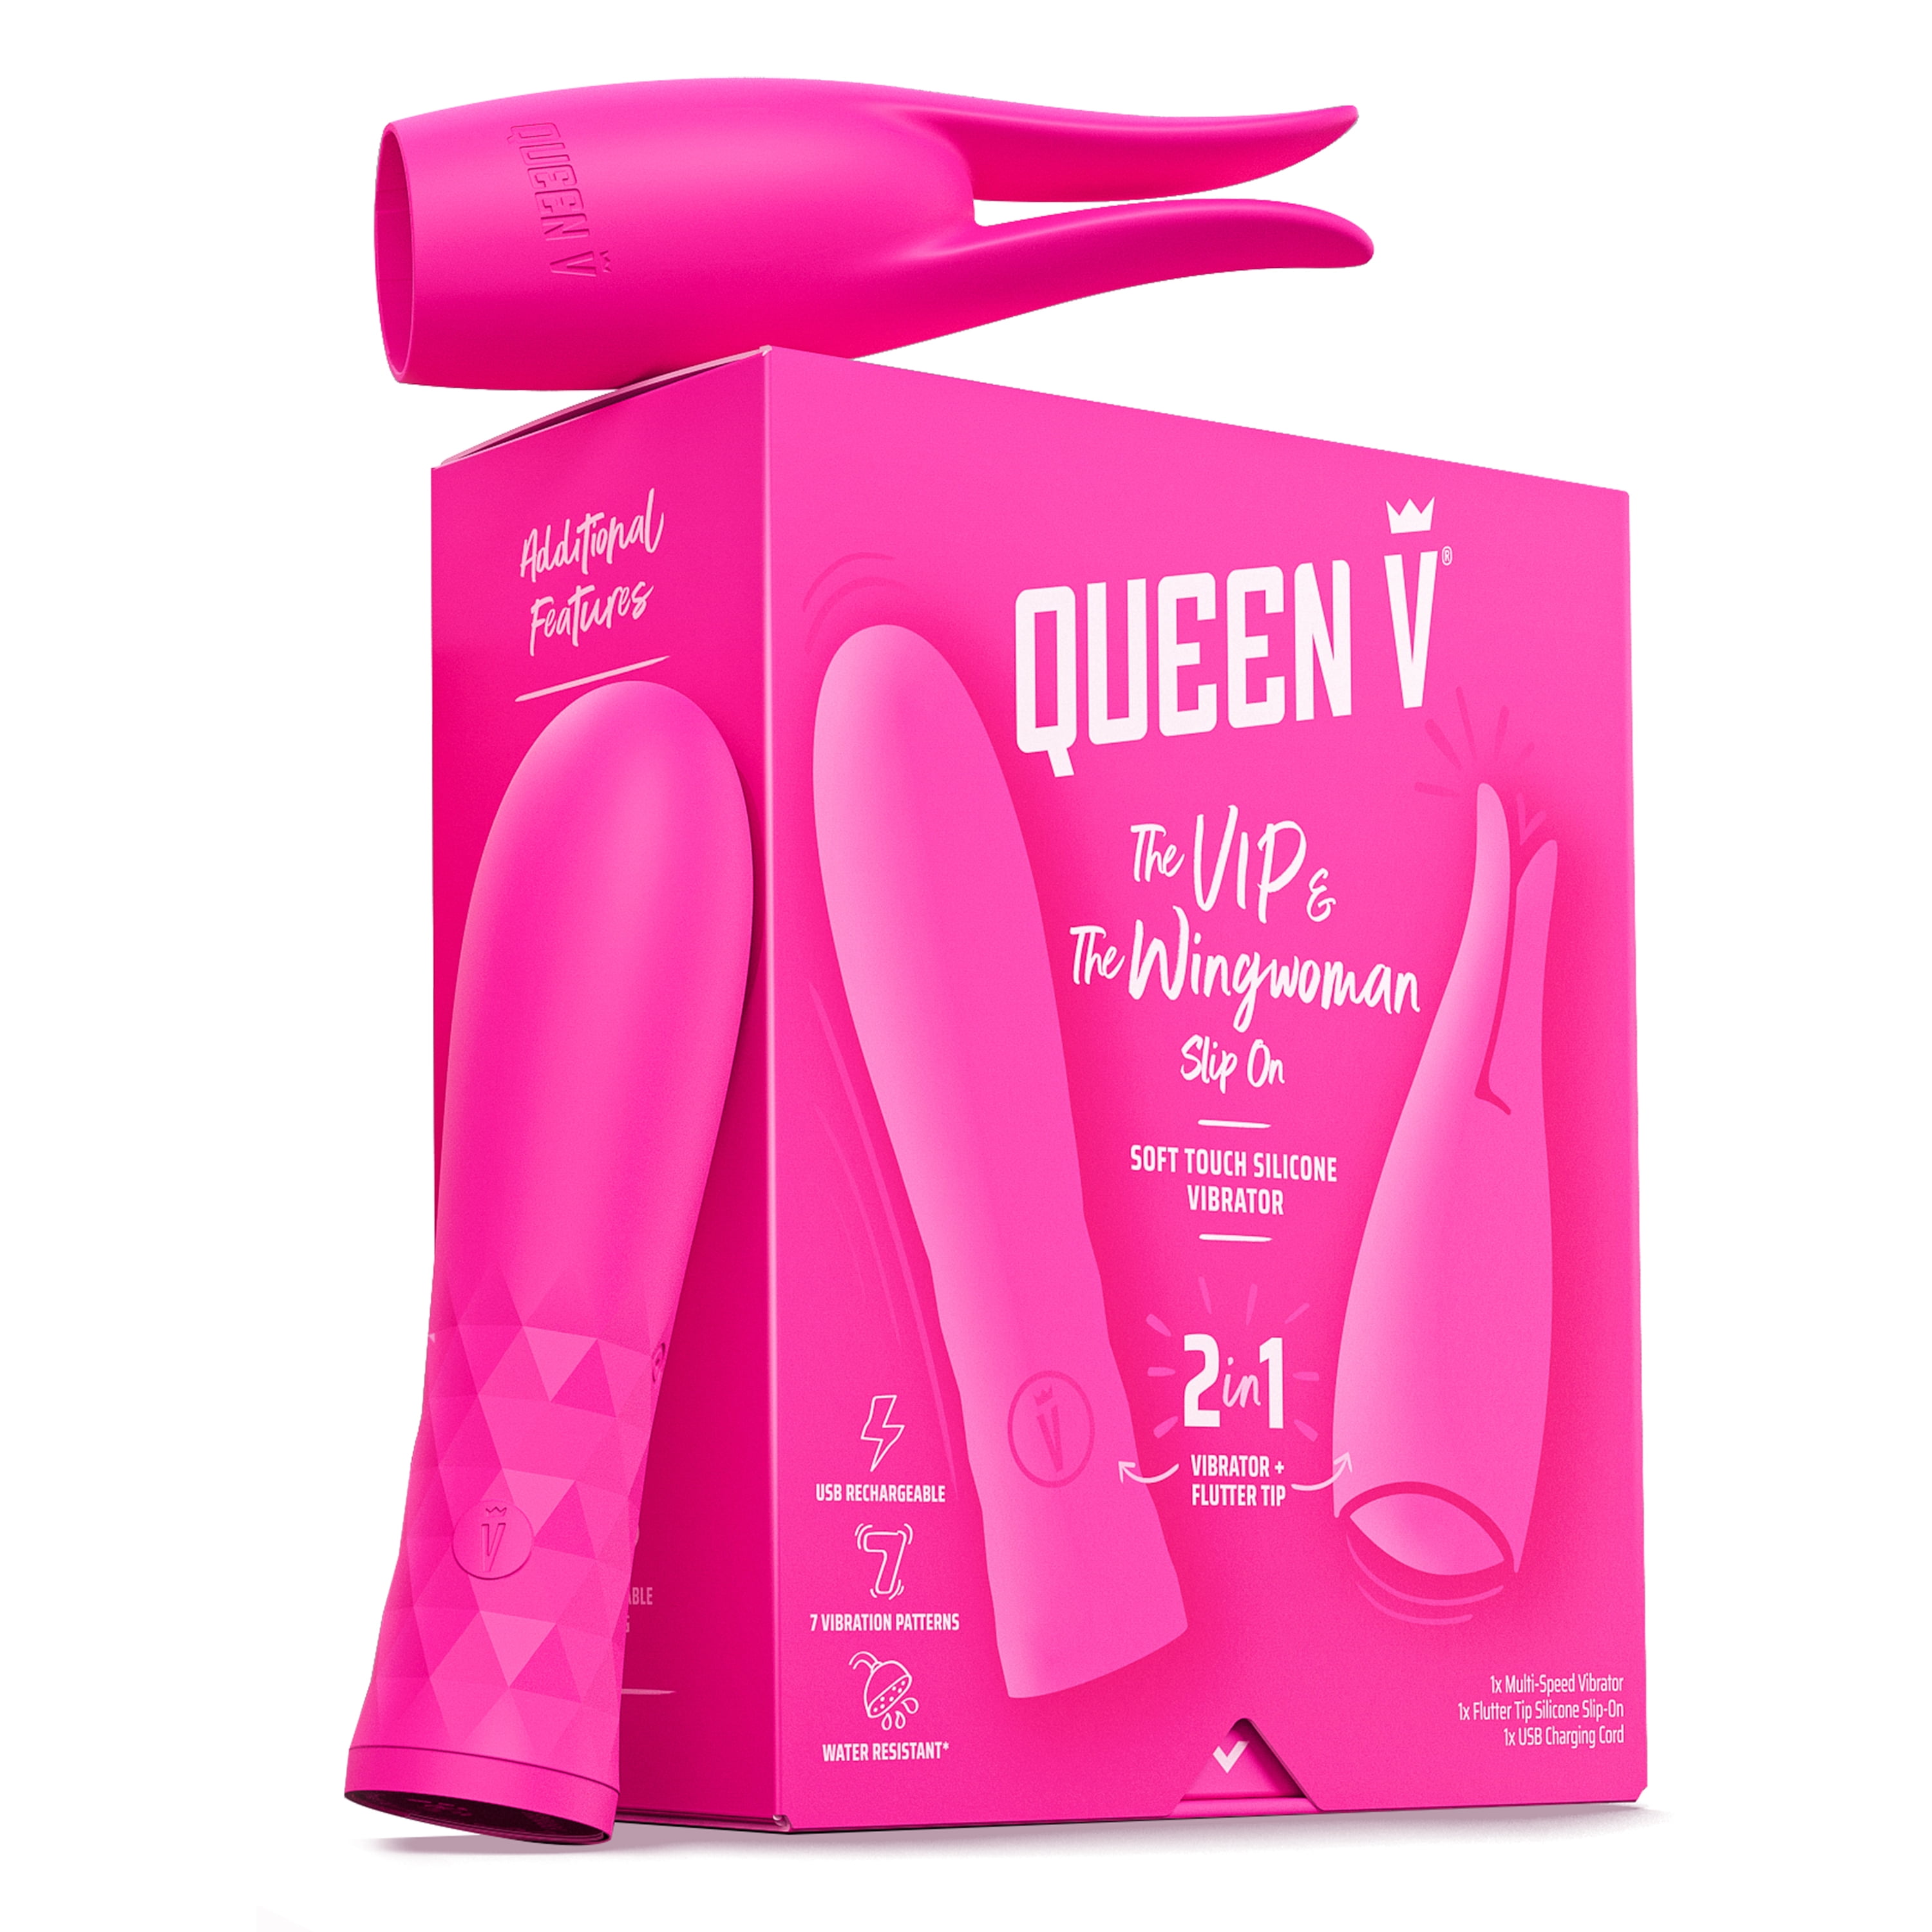 Queen V The VIP & The Wingwoman Slip On, Adult Sex Toy for Woman